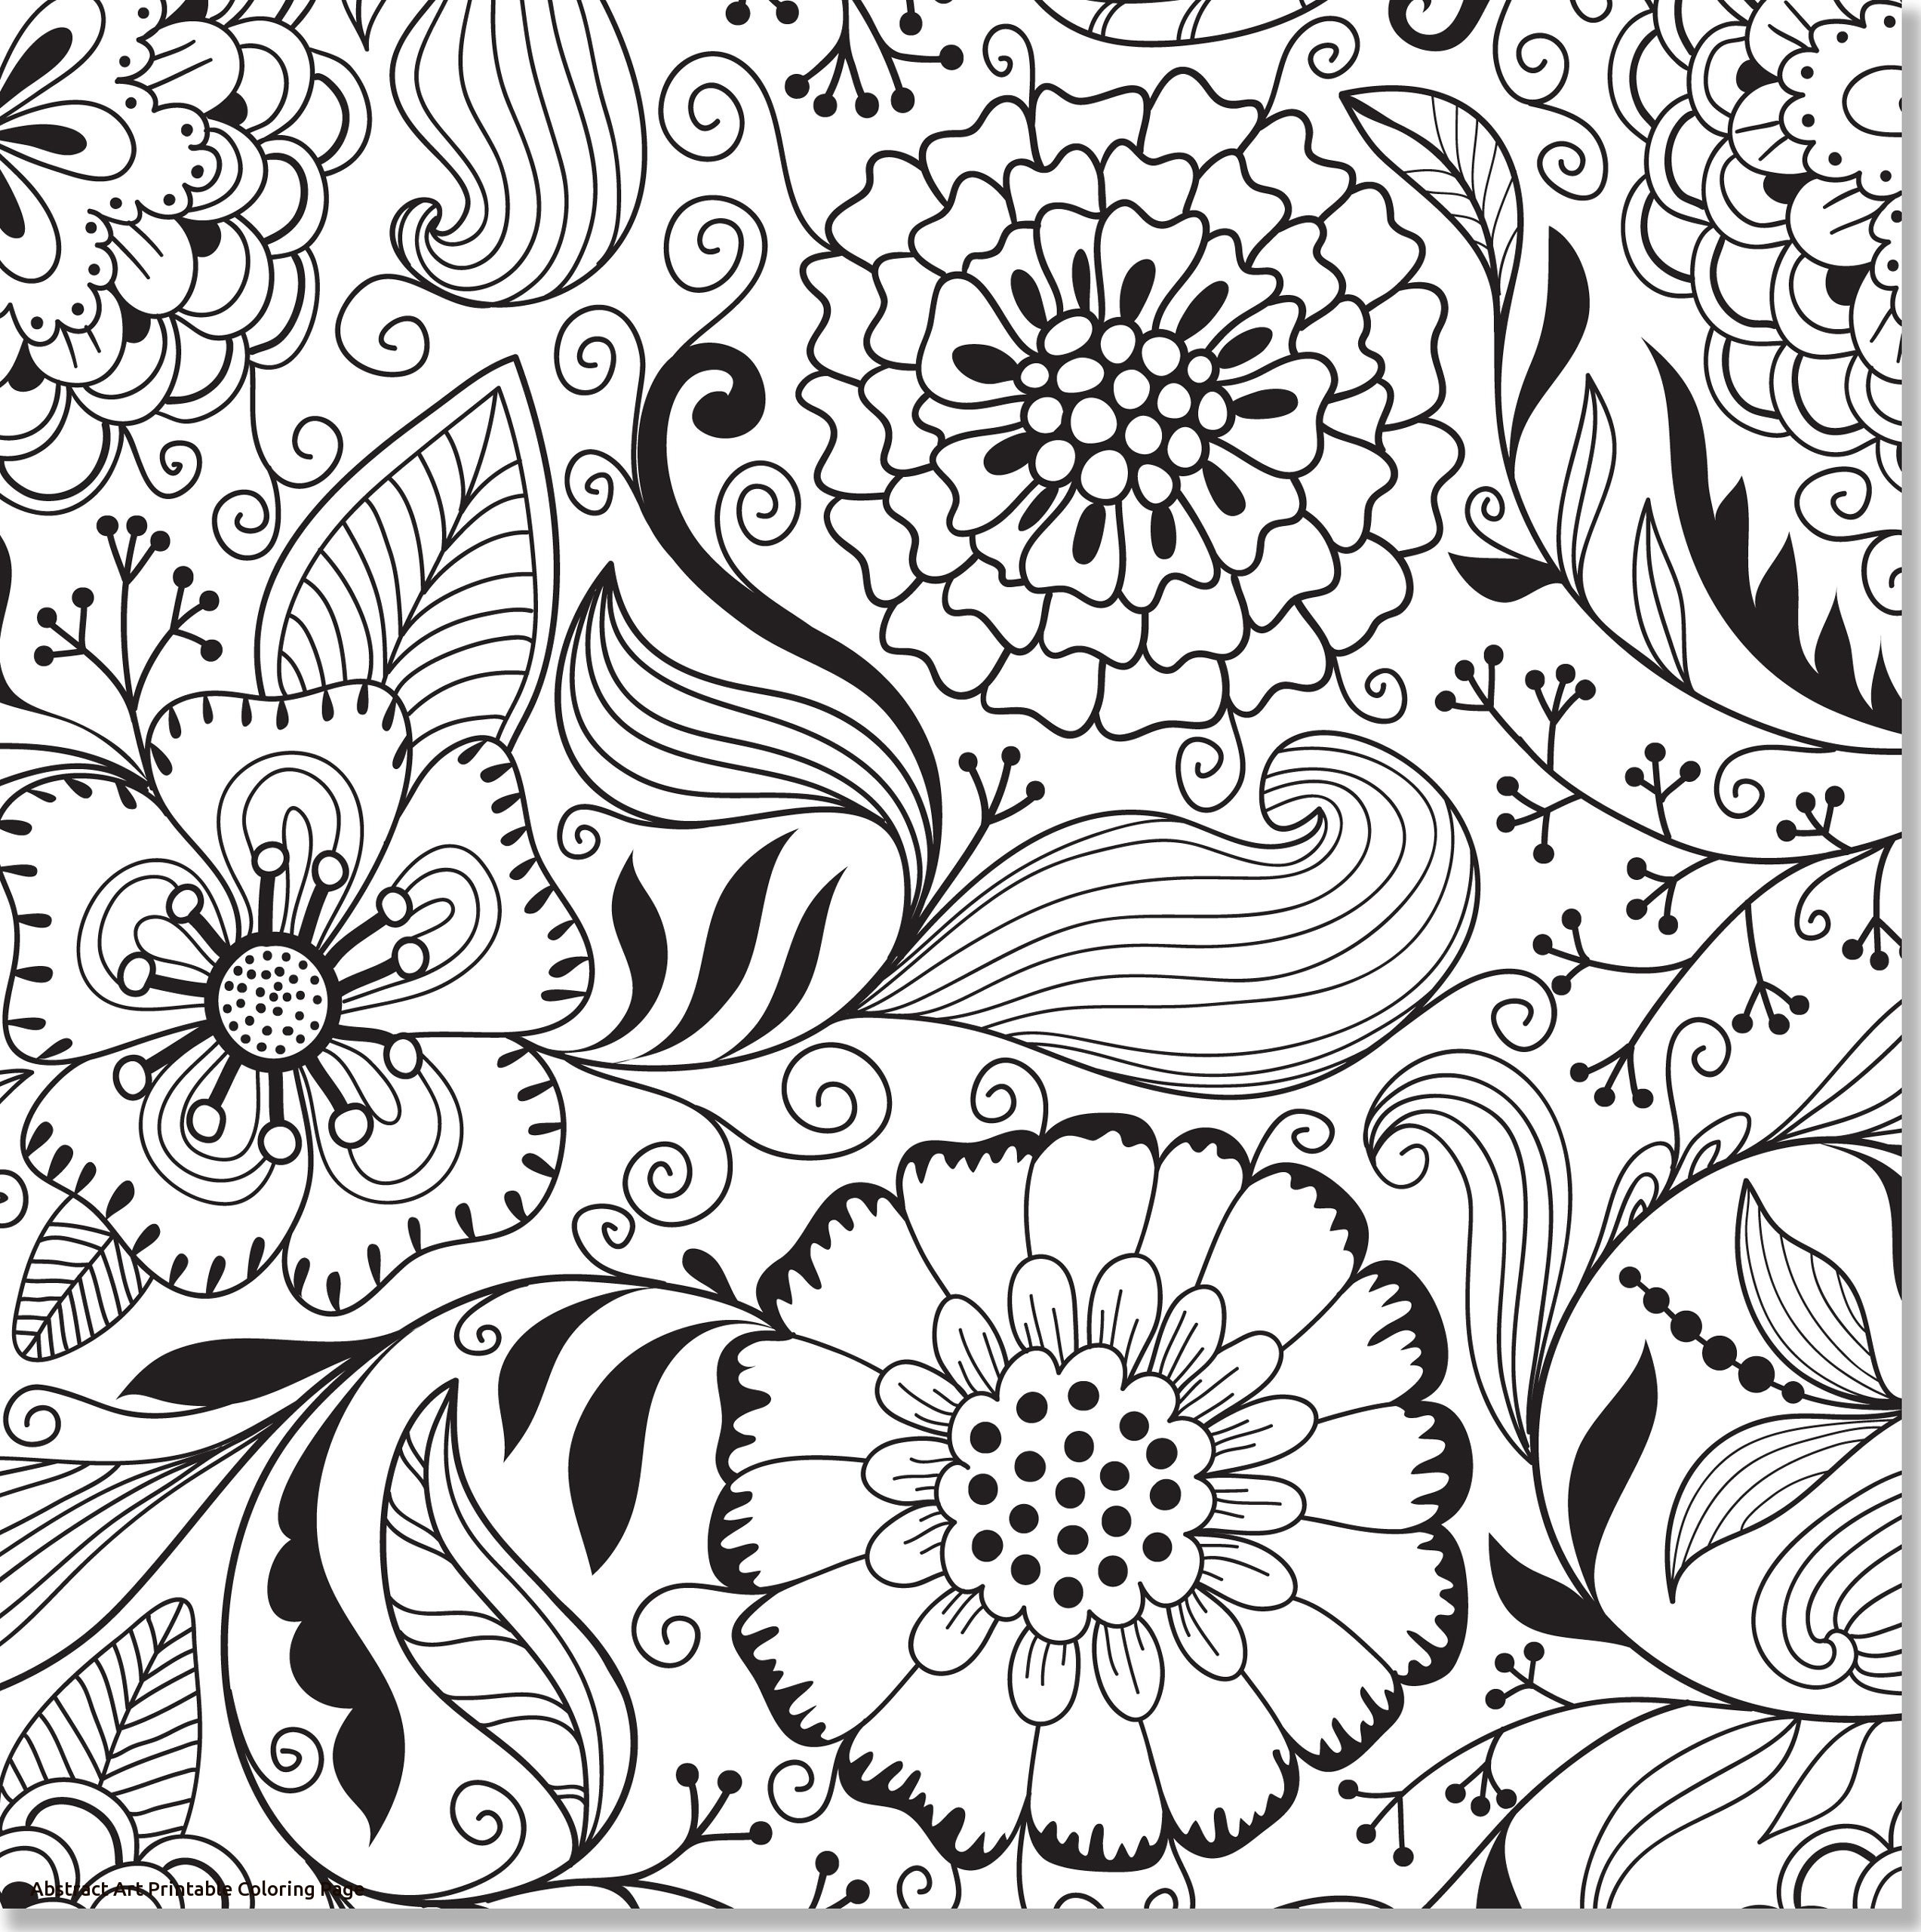 Medallion Coloring Pages at GetColorings.com | Free printable colorings